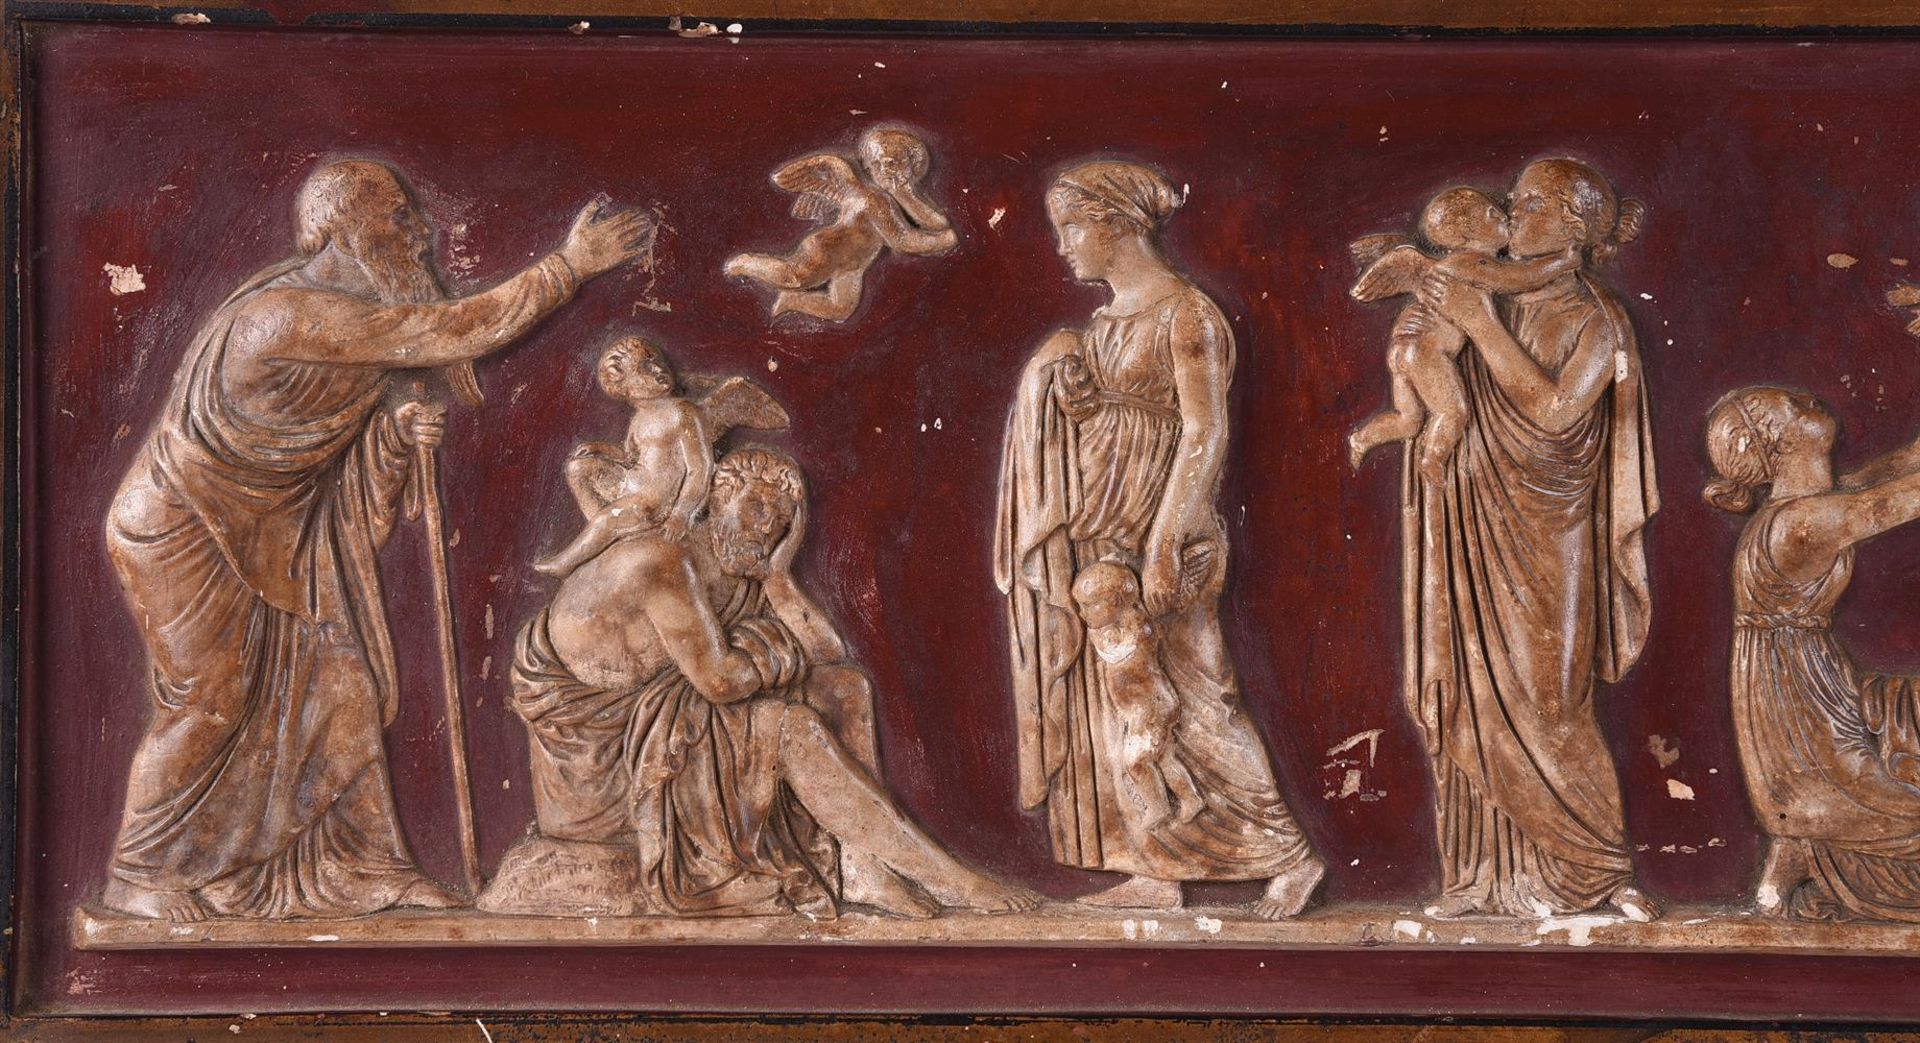 AFTER THORVALDSEN, A PLASTER FRIEZE 'THE AGES OF LOVE', LATE 19TH CENTURY, DANISH - Image 3 of 5